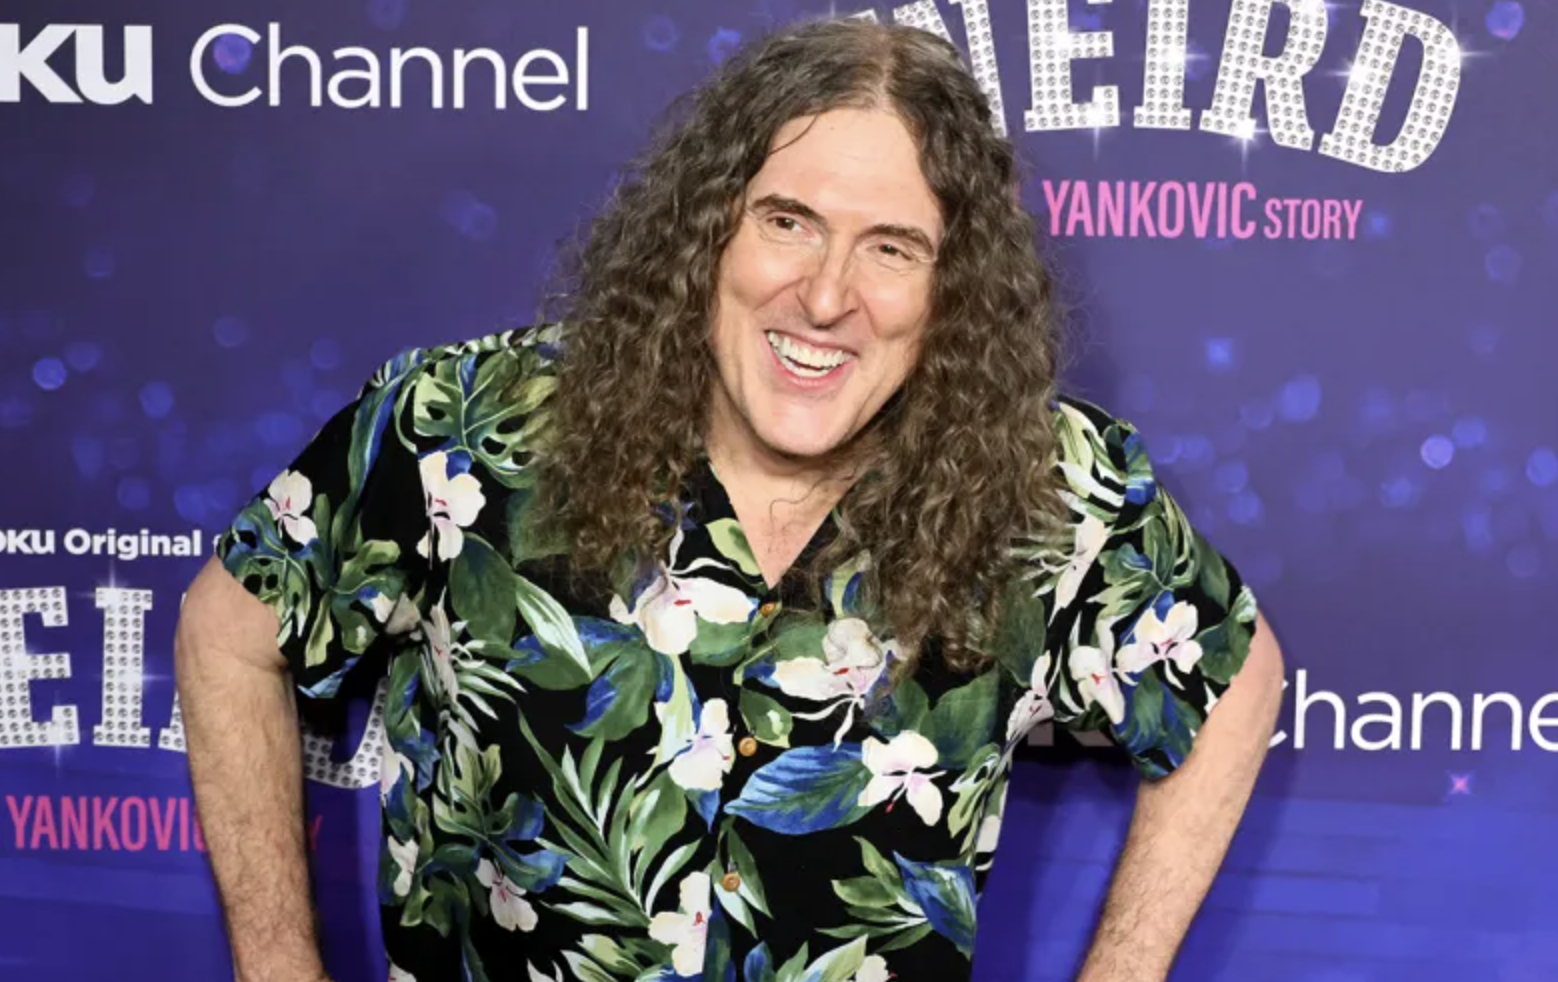 “TIL Weird Al turned down a $5 million beer endorsement deal. He thought it was ethically wrong because a lot of his fans were young and impressionable.”